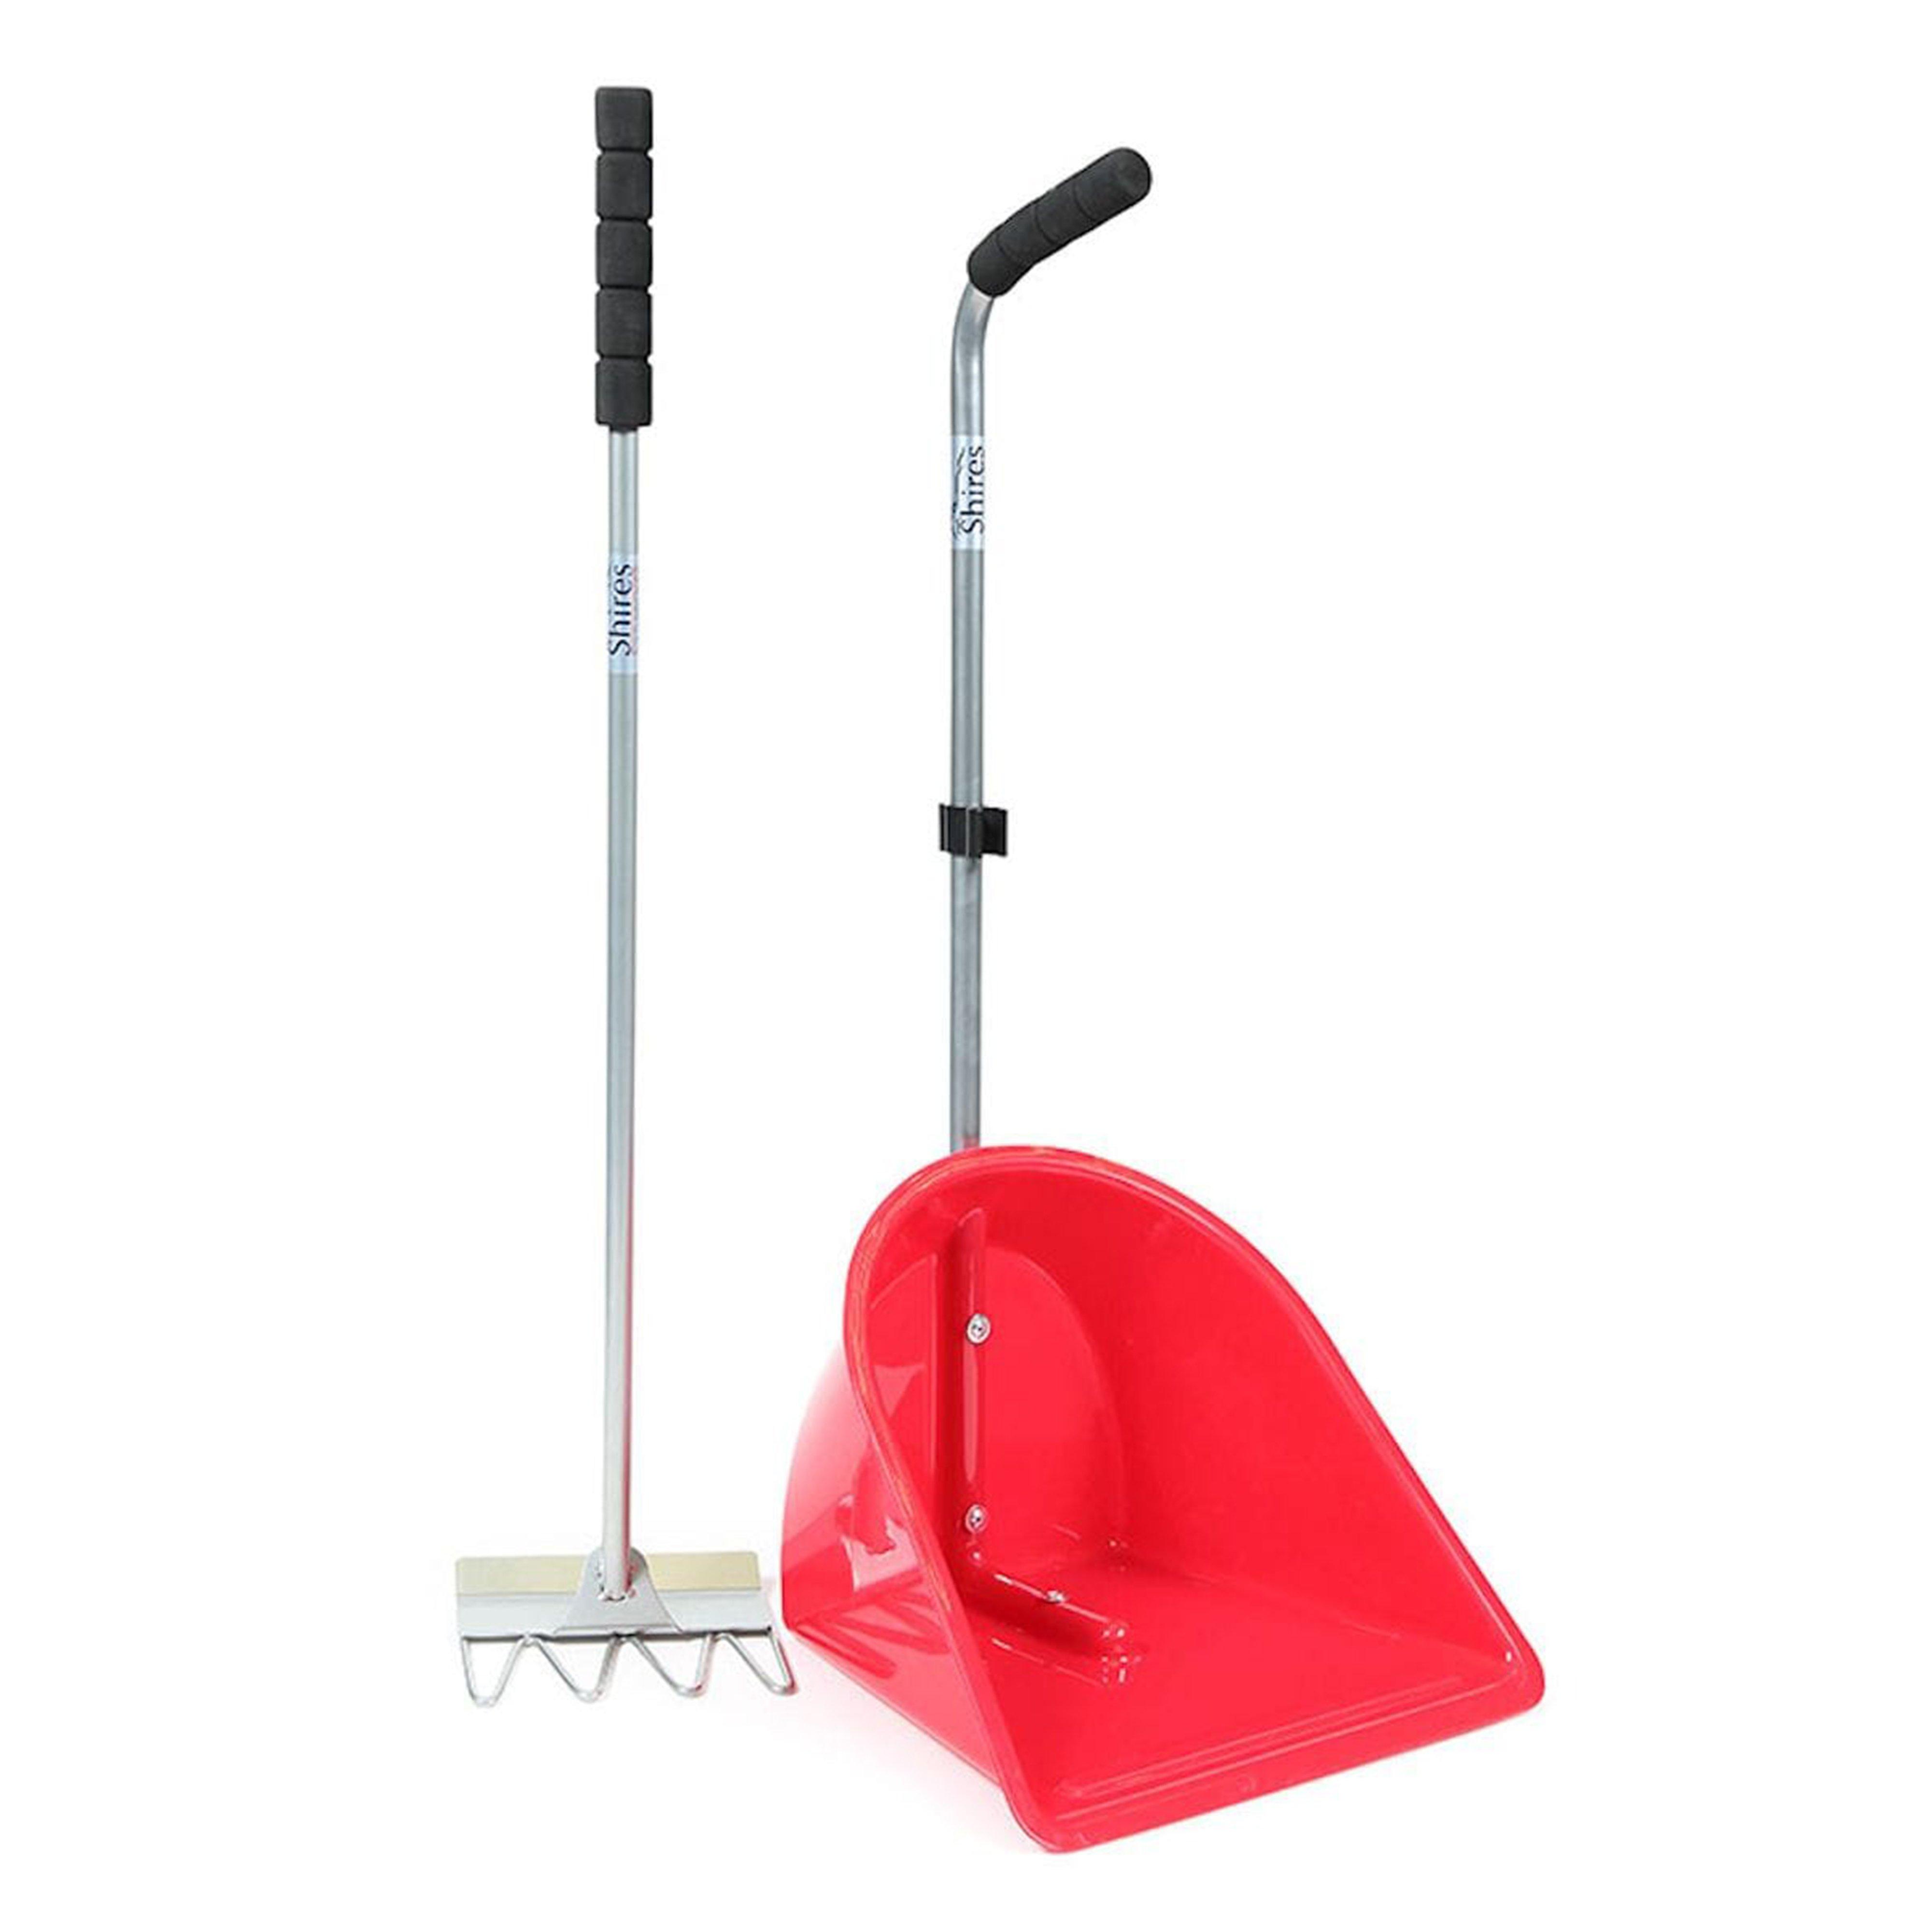 Shires Manure Scoop Tall Handle Red